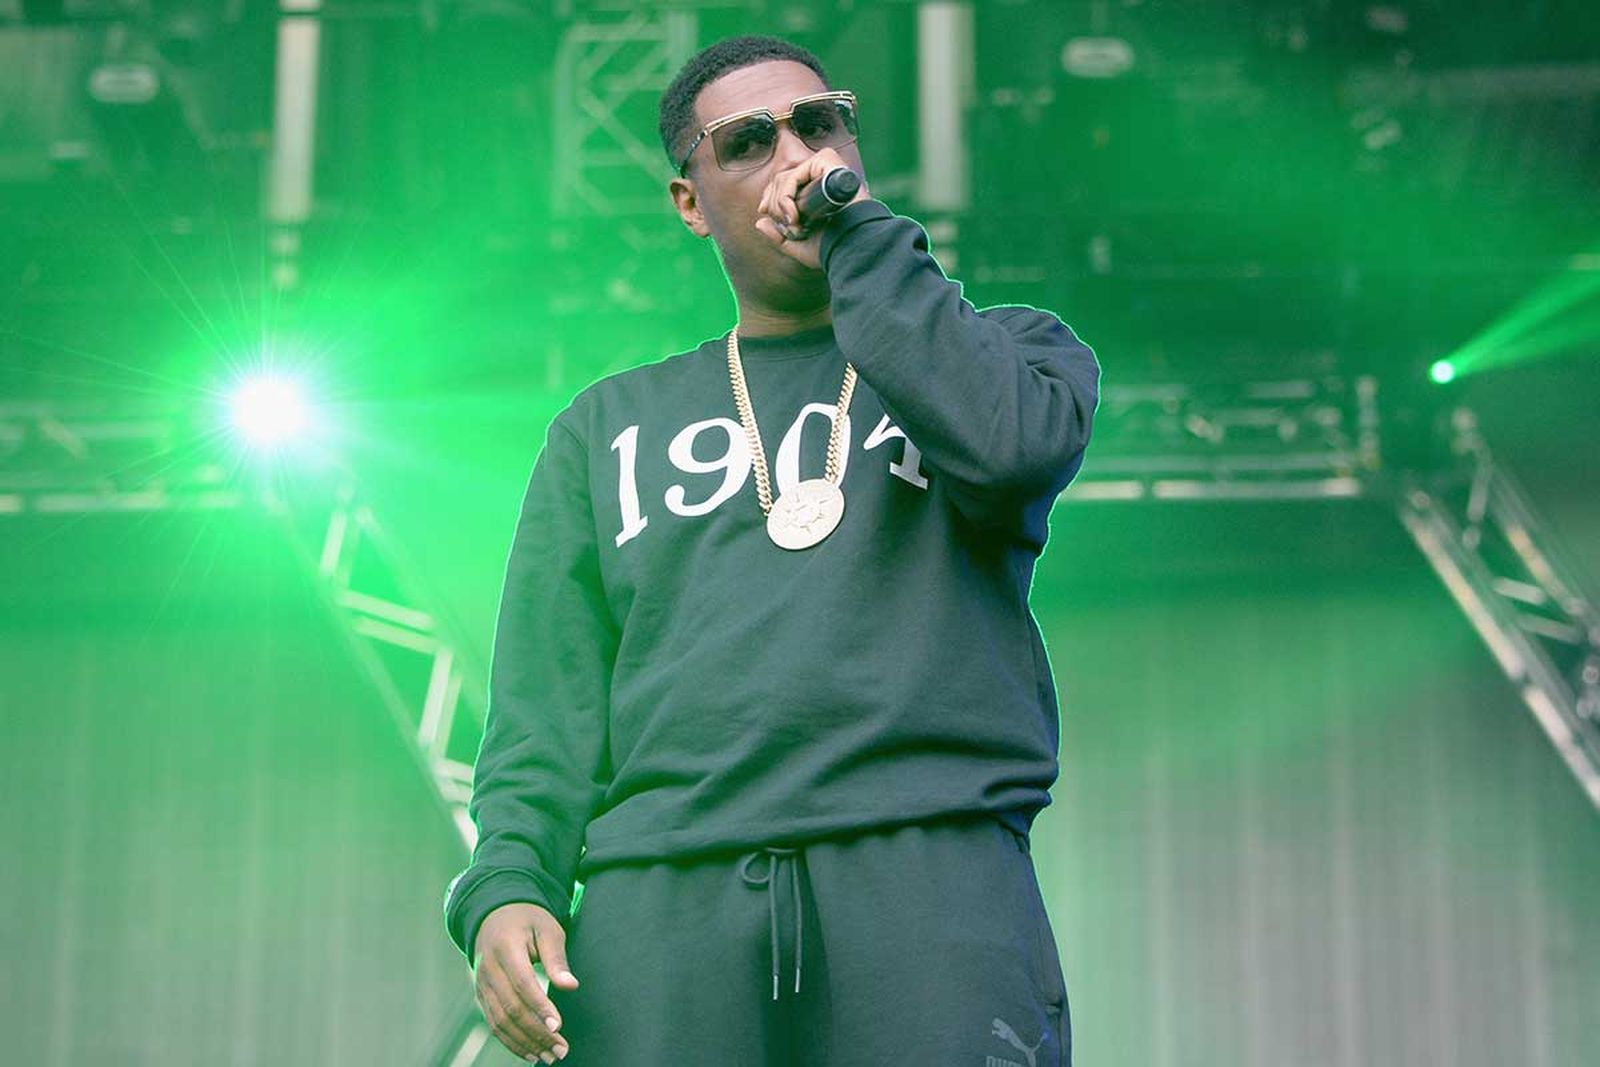 Jay Electronica performing at Made in America Festival